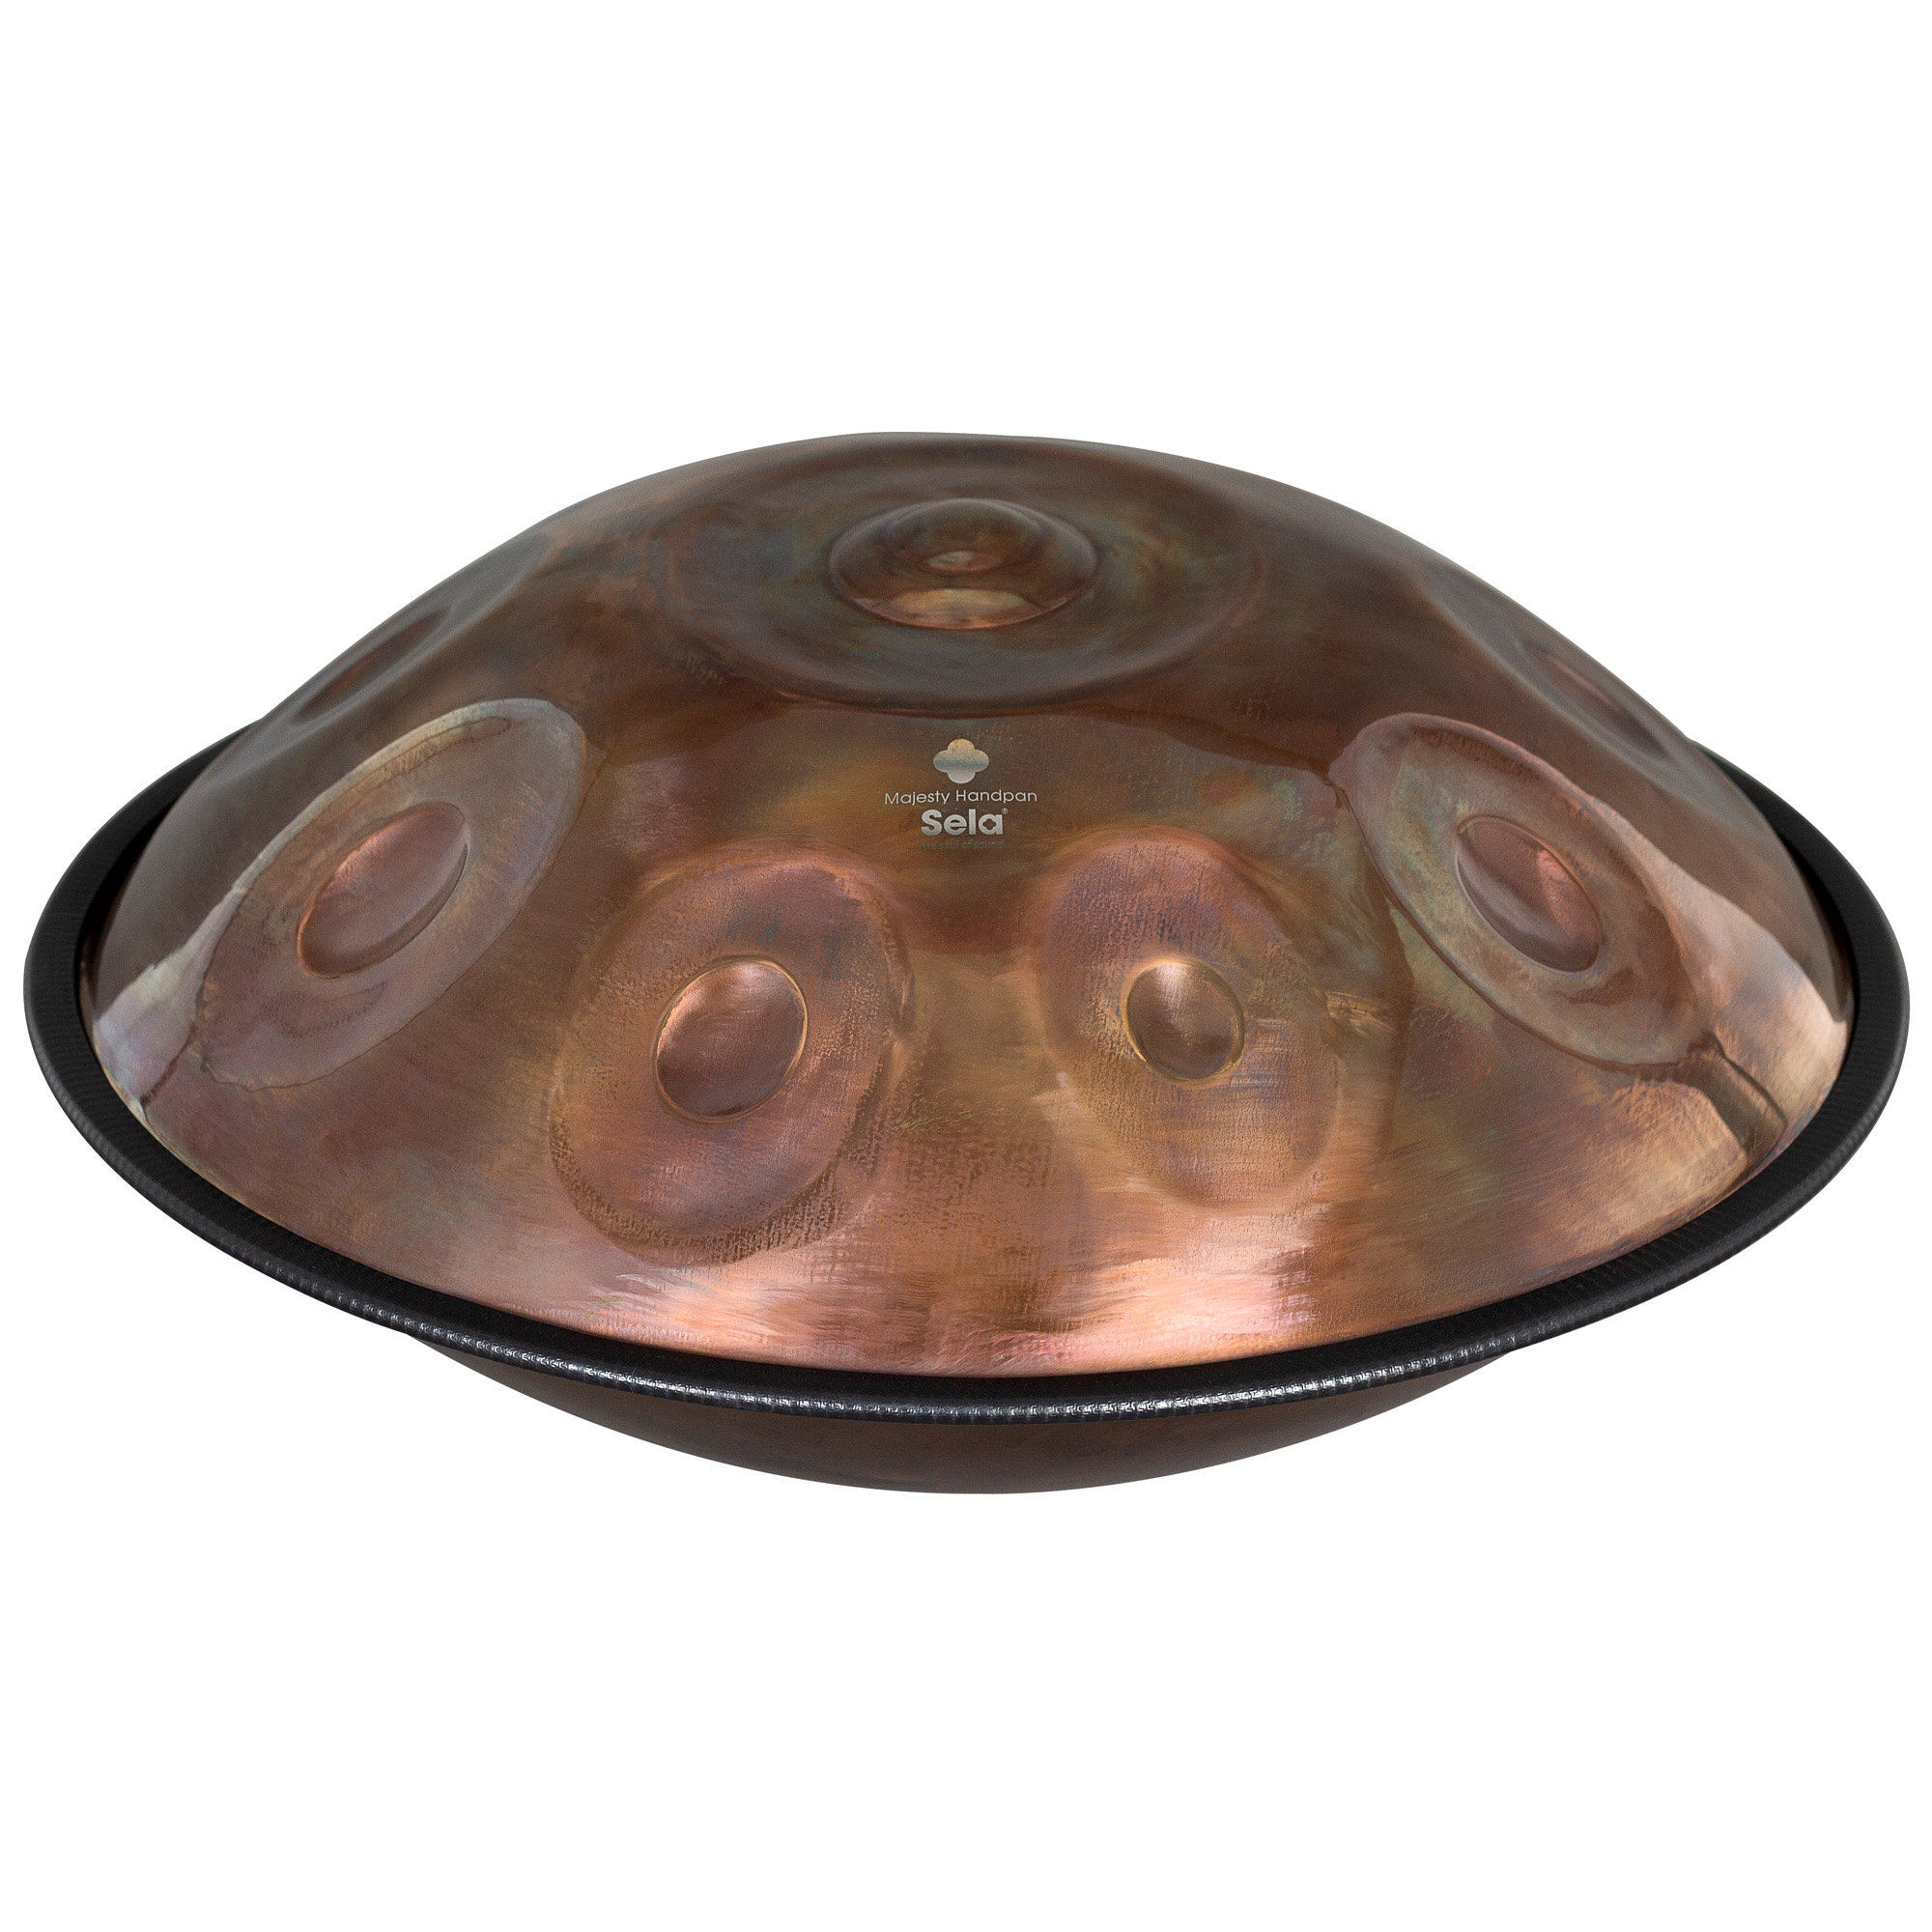 Majesty Handpan B Celtic Minor Stainless Steel Product Photos 1